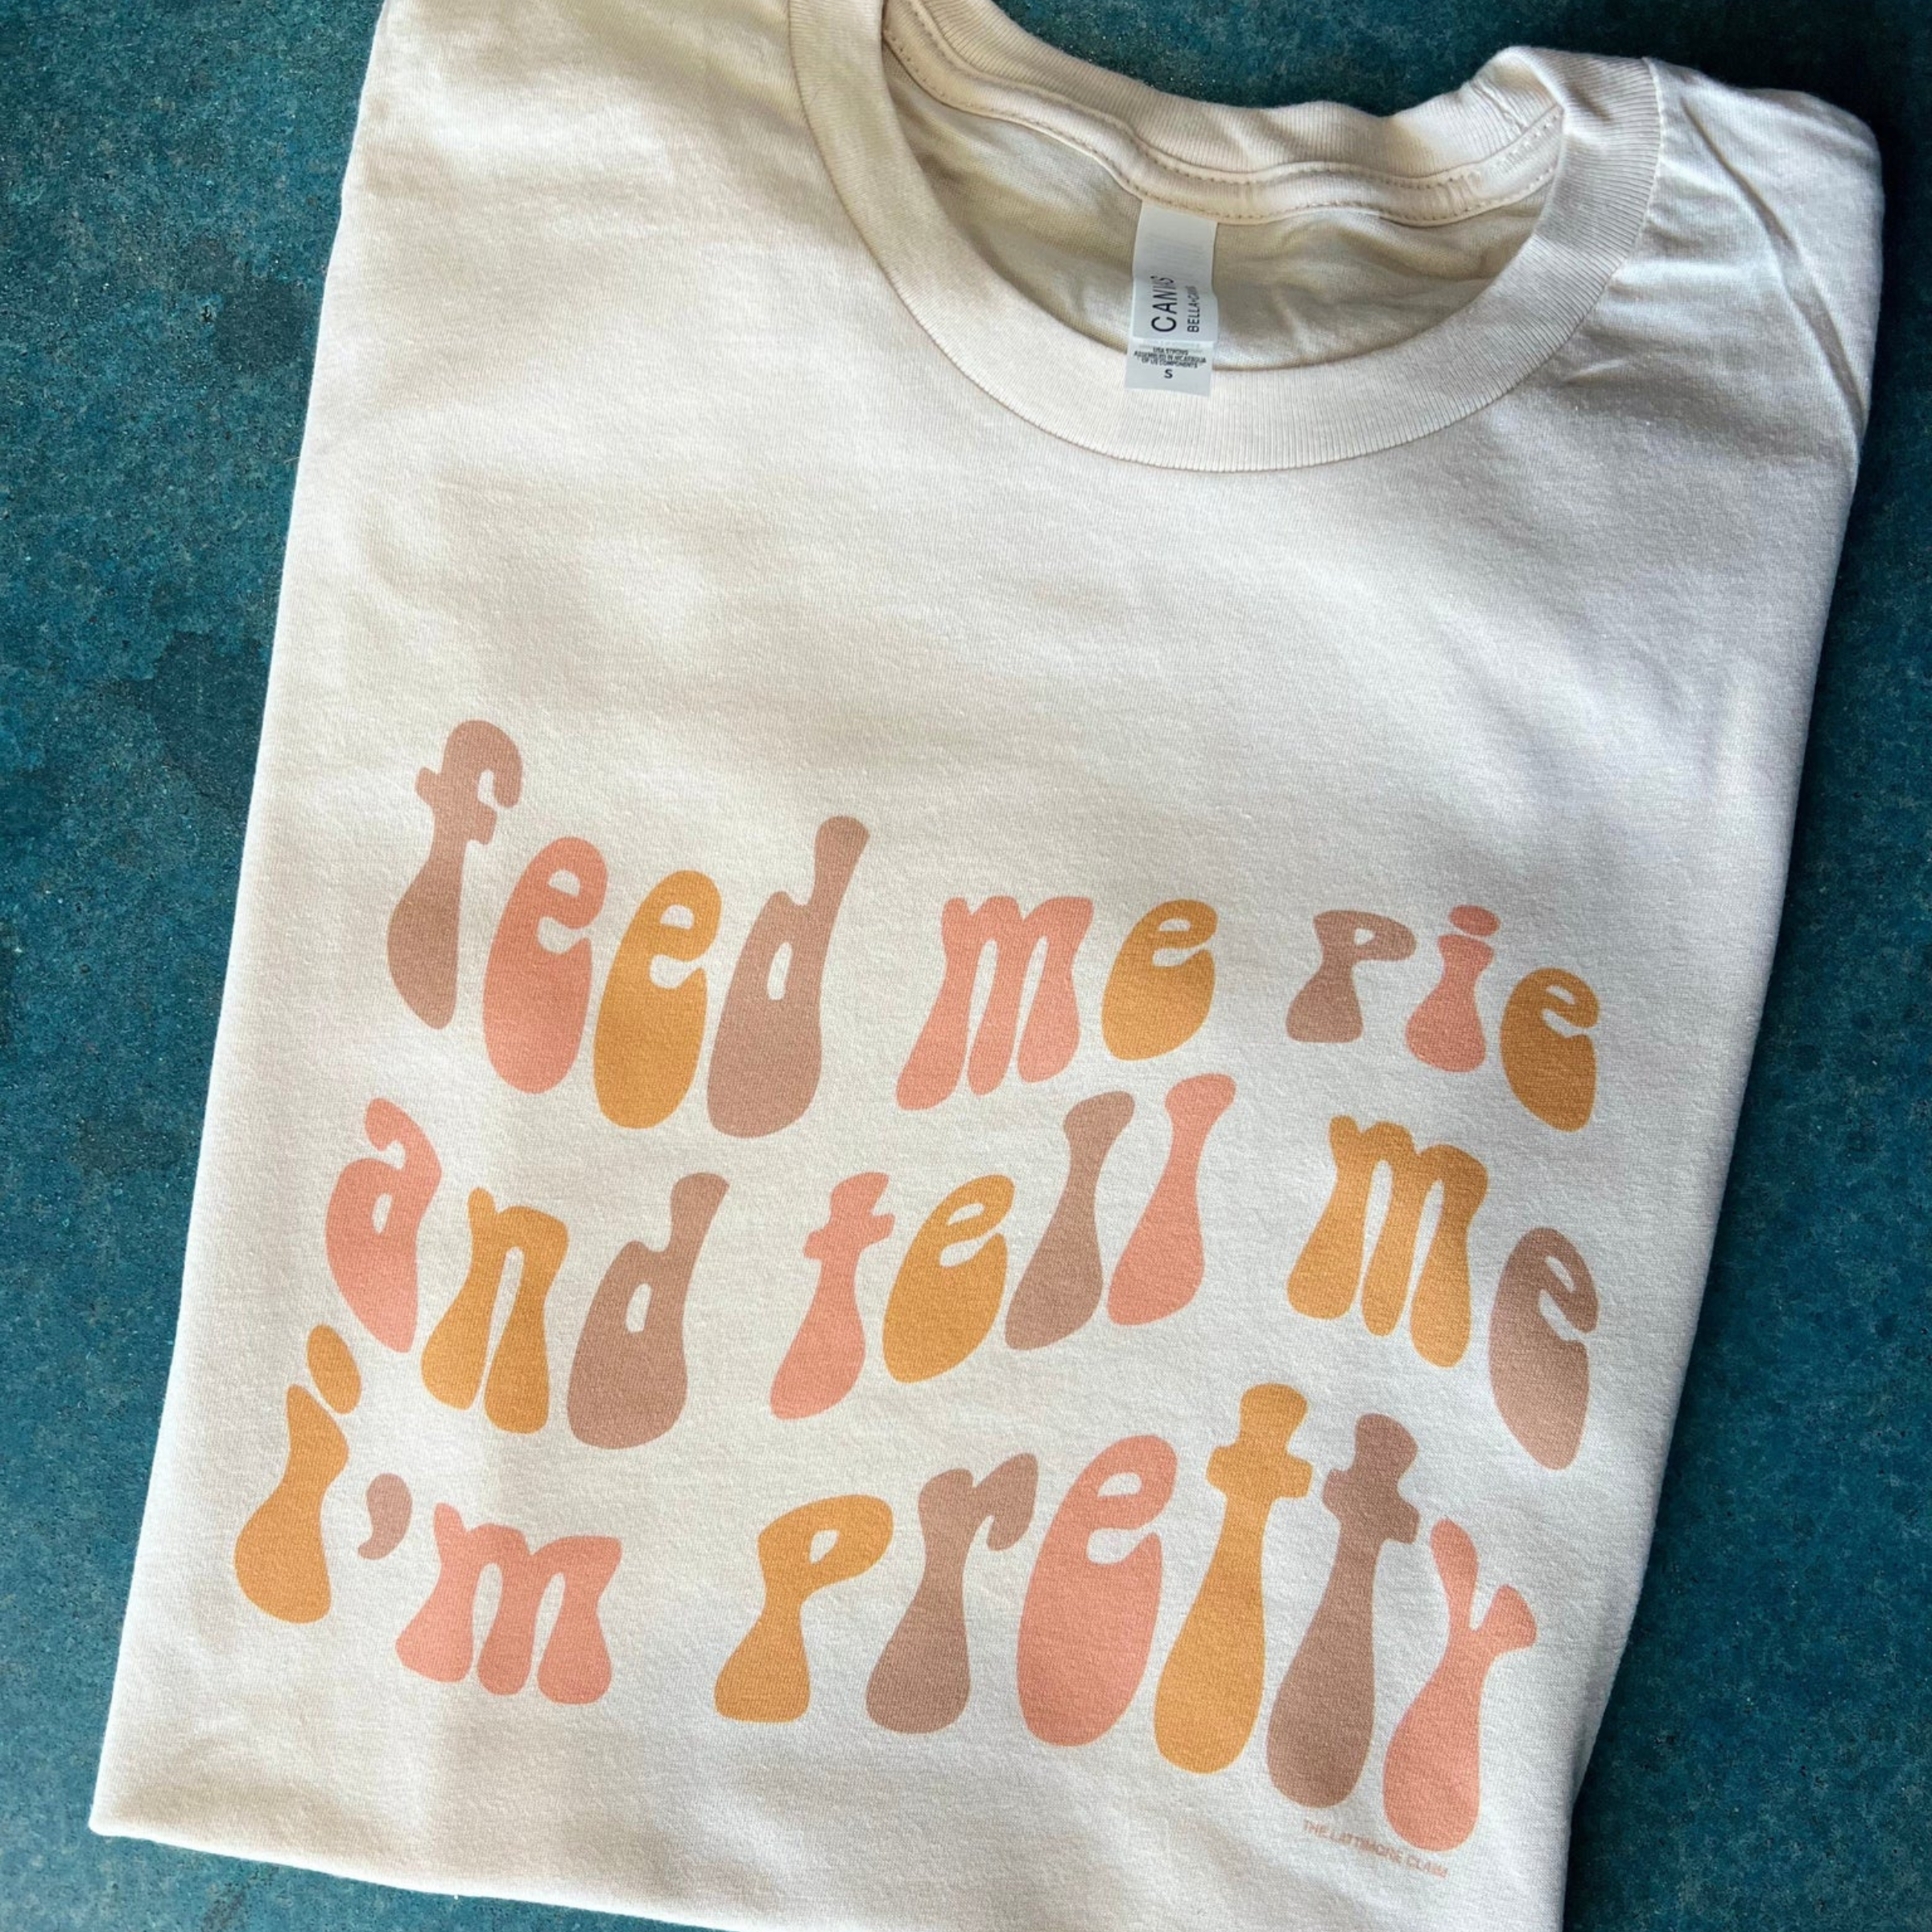 Cream tee folded in half on blue background with groovy words saying "feed me pie and tell me i'm pretty" in colors brown, pink and mustard alternating.